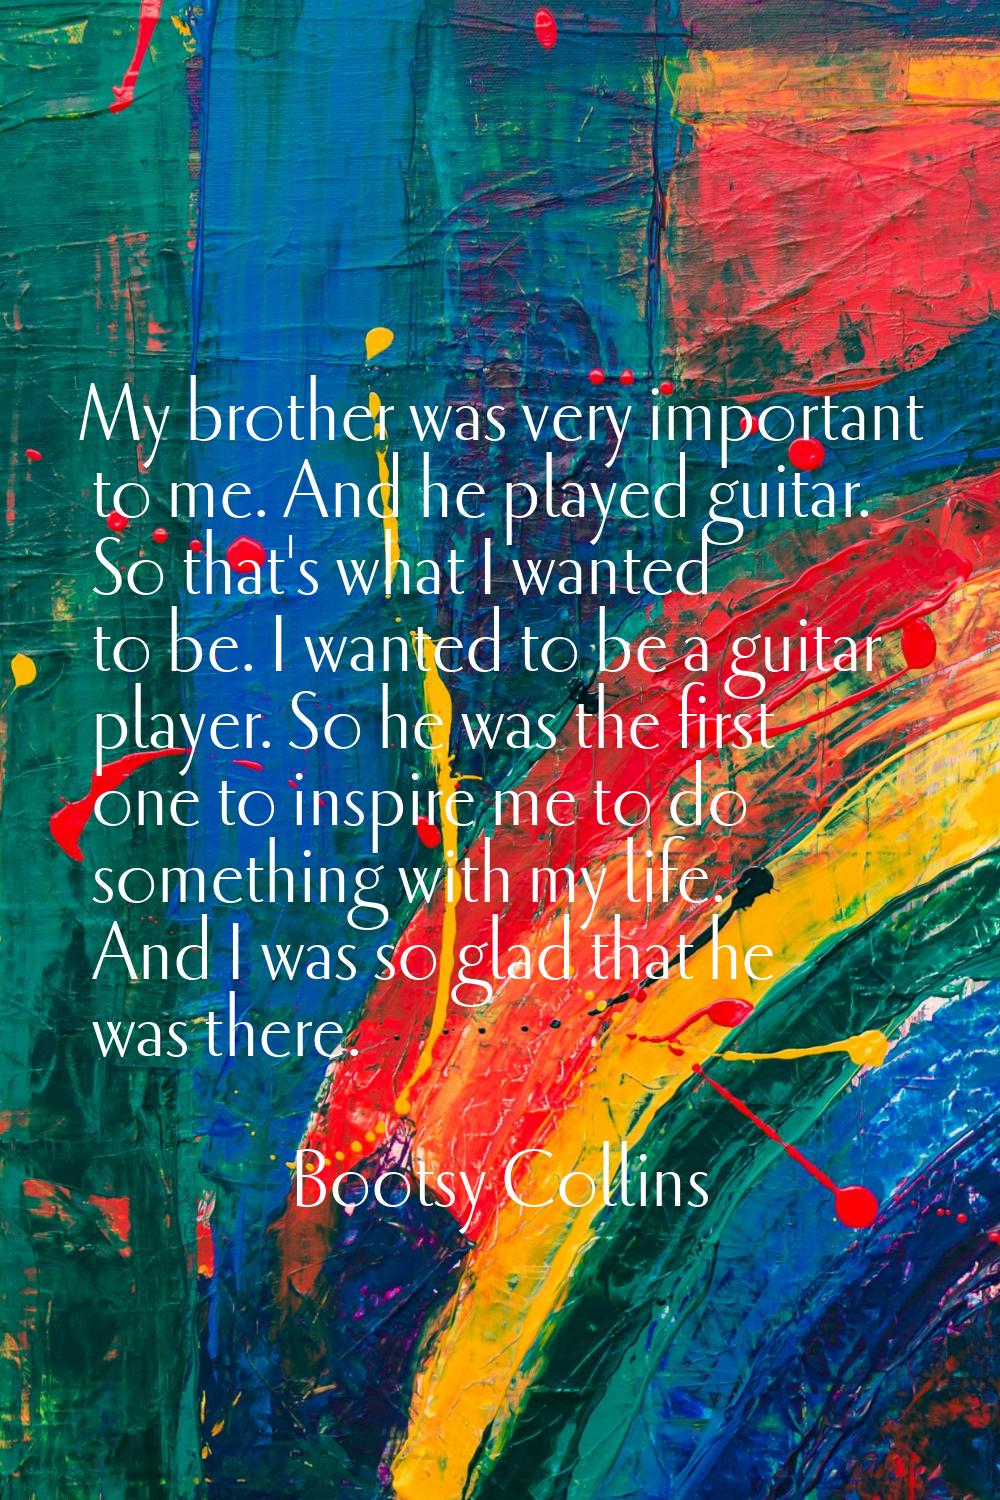 My brother was very important to me. And he played guitar. So that's what I wanted to be. I wanted 